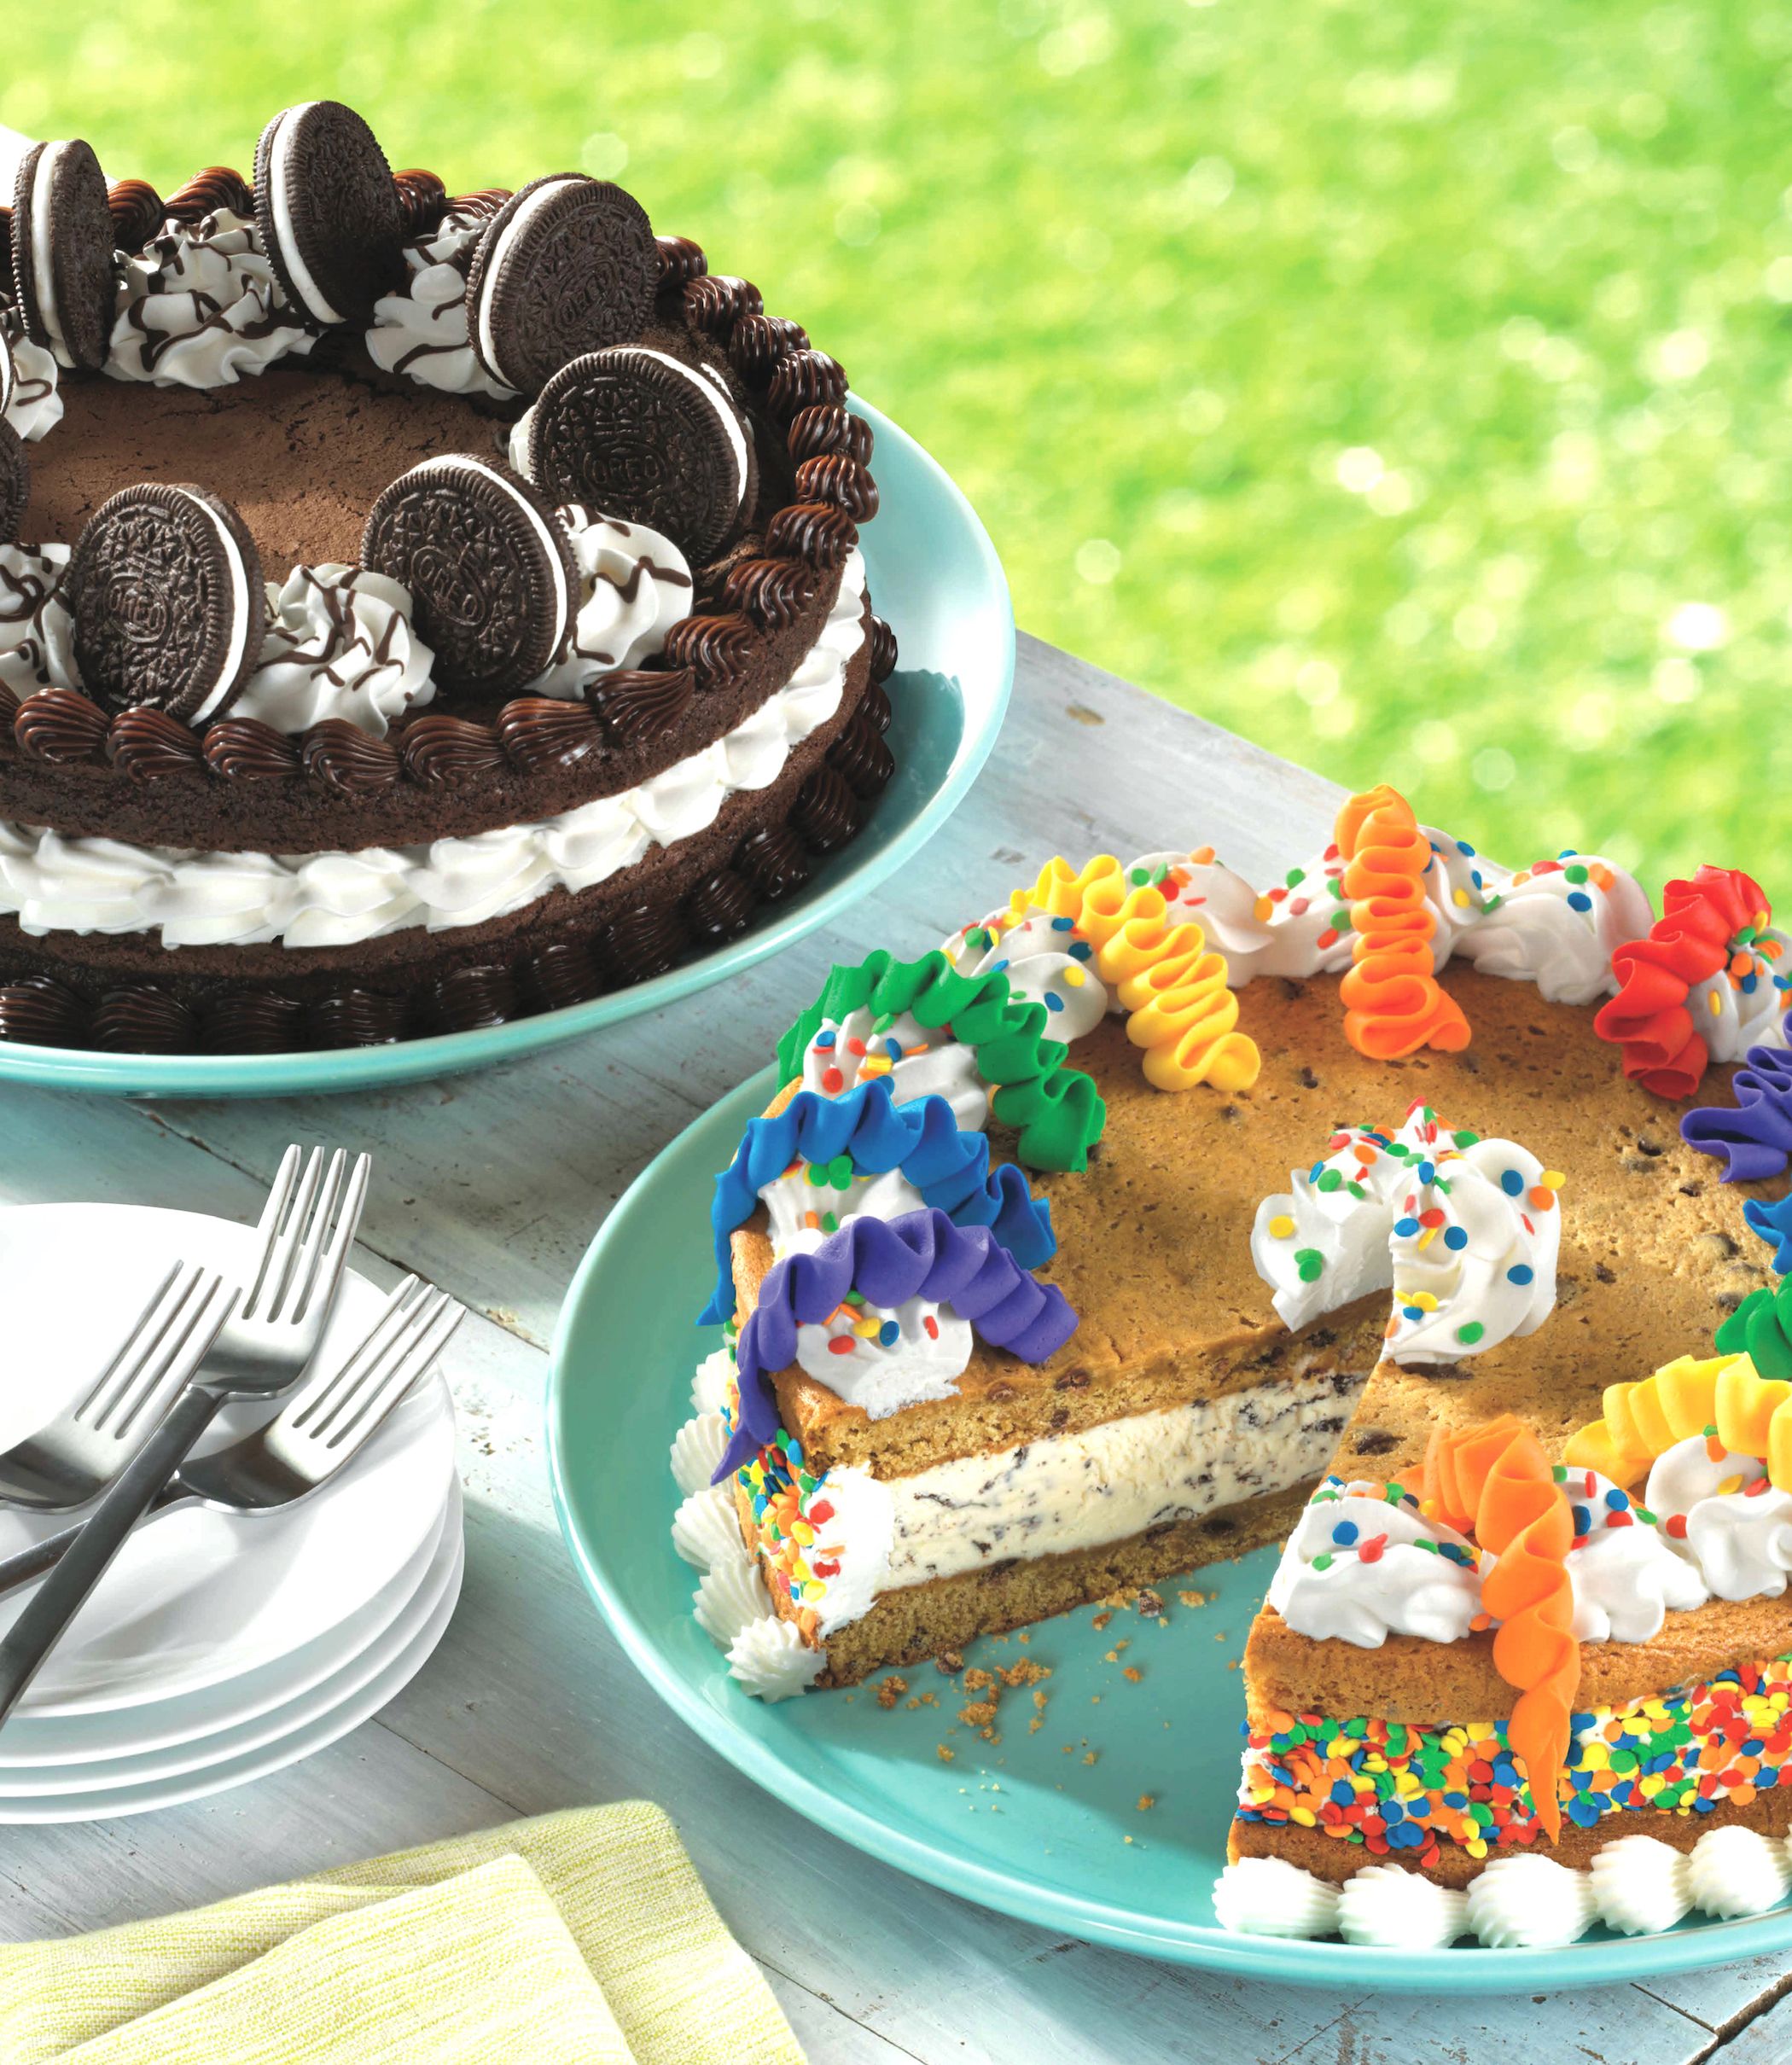 Baskin Robbins' New Cookie Cakes Are Basically Giant Ice Cream ...